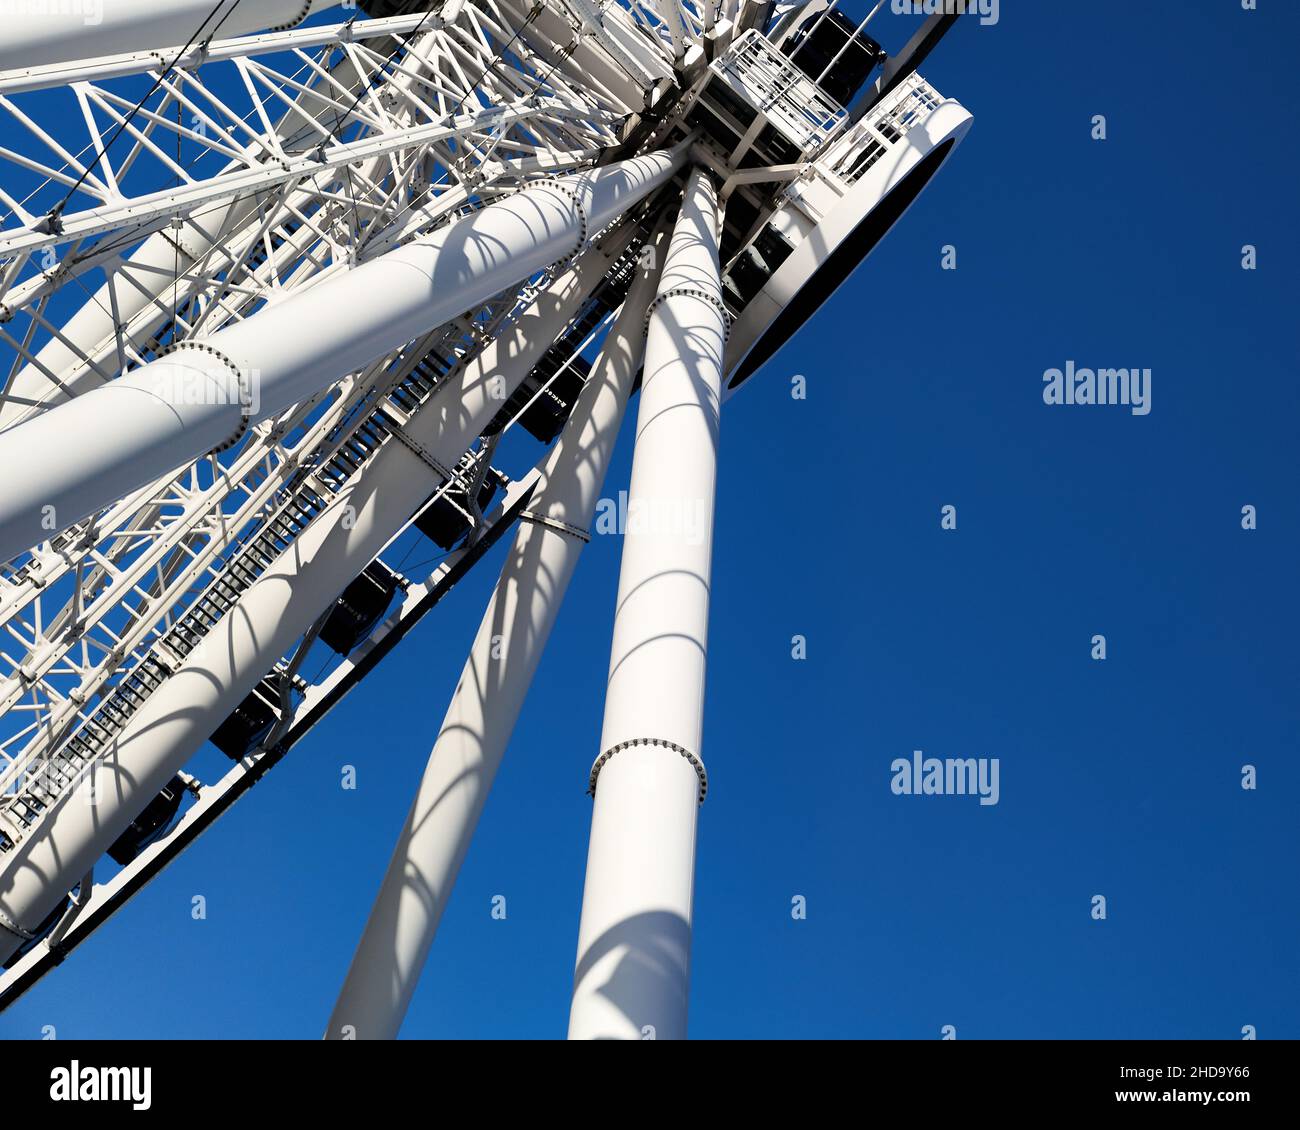 detail of support structure of a ferris wheel Stock Photo